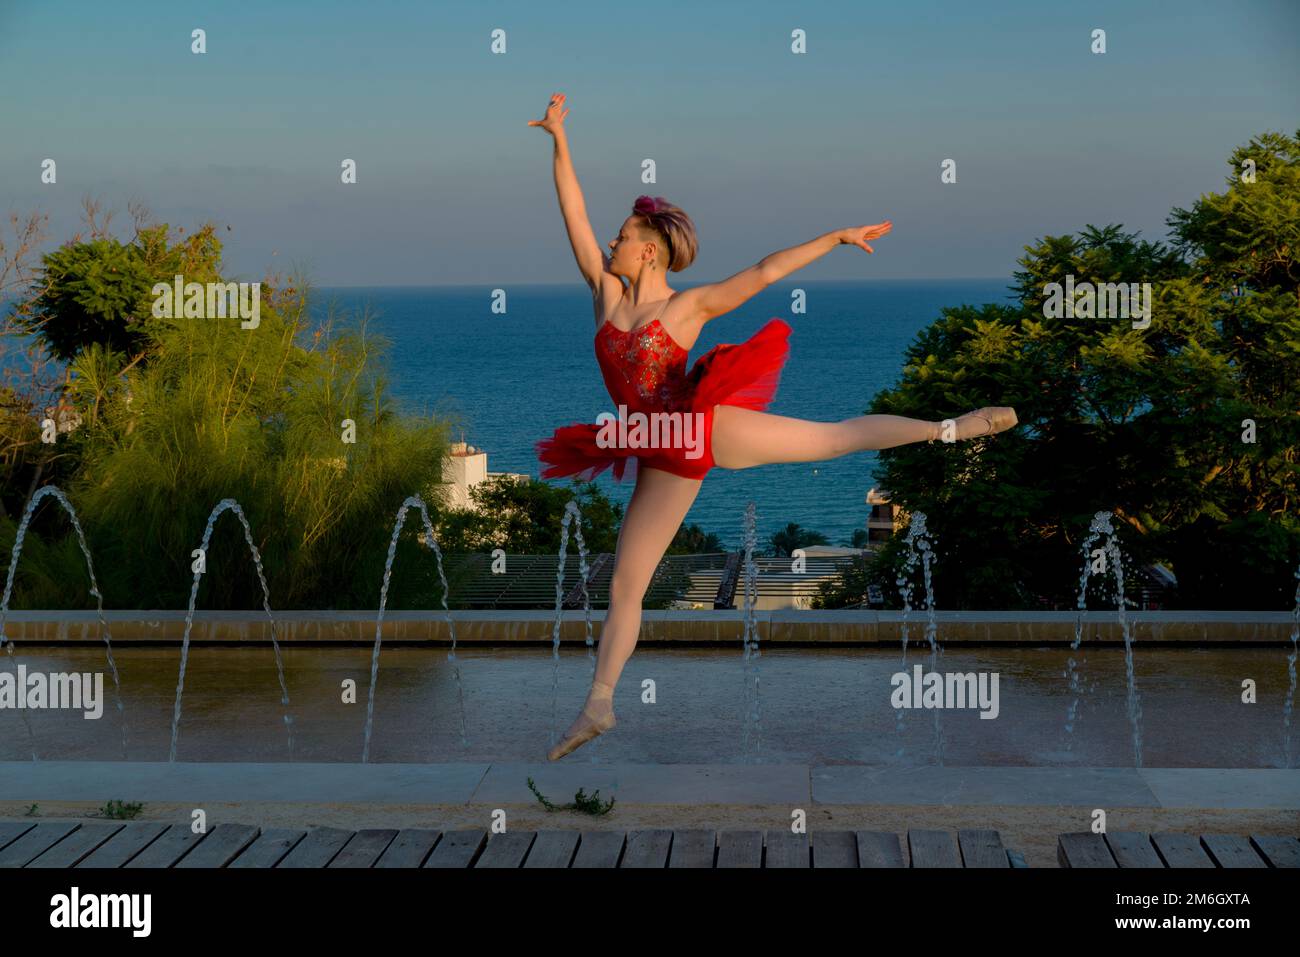 young ballet dancer girl with red outfit outdoors Stock Photo